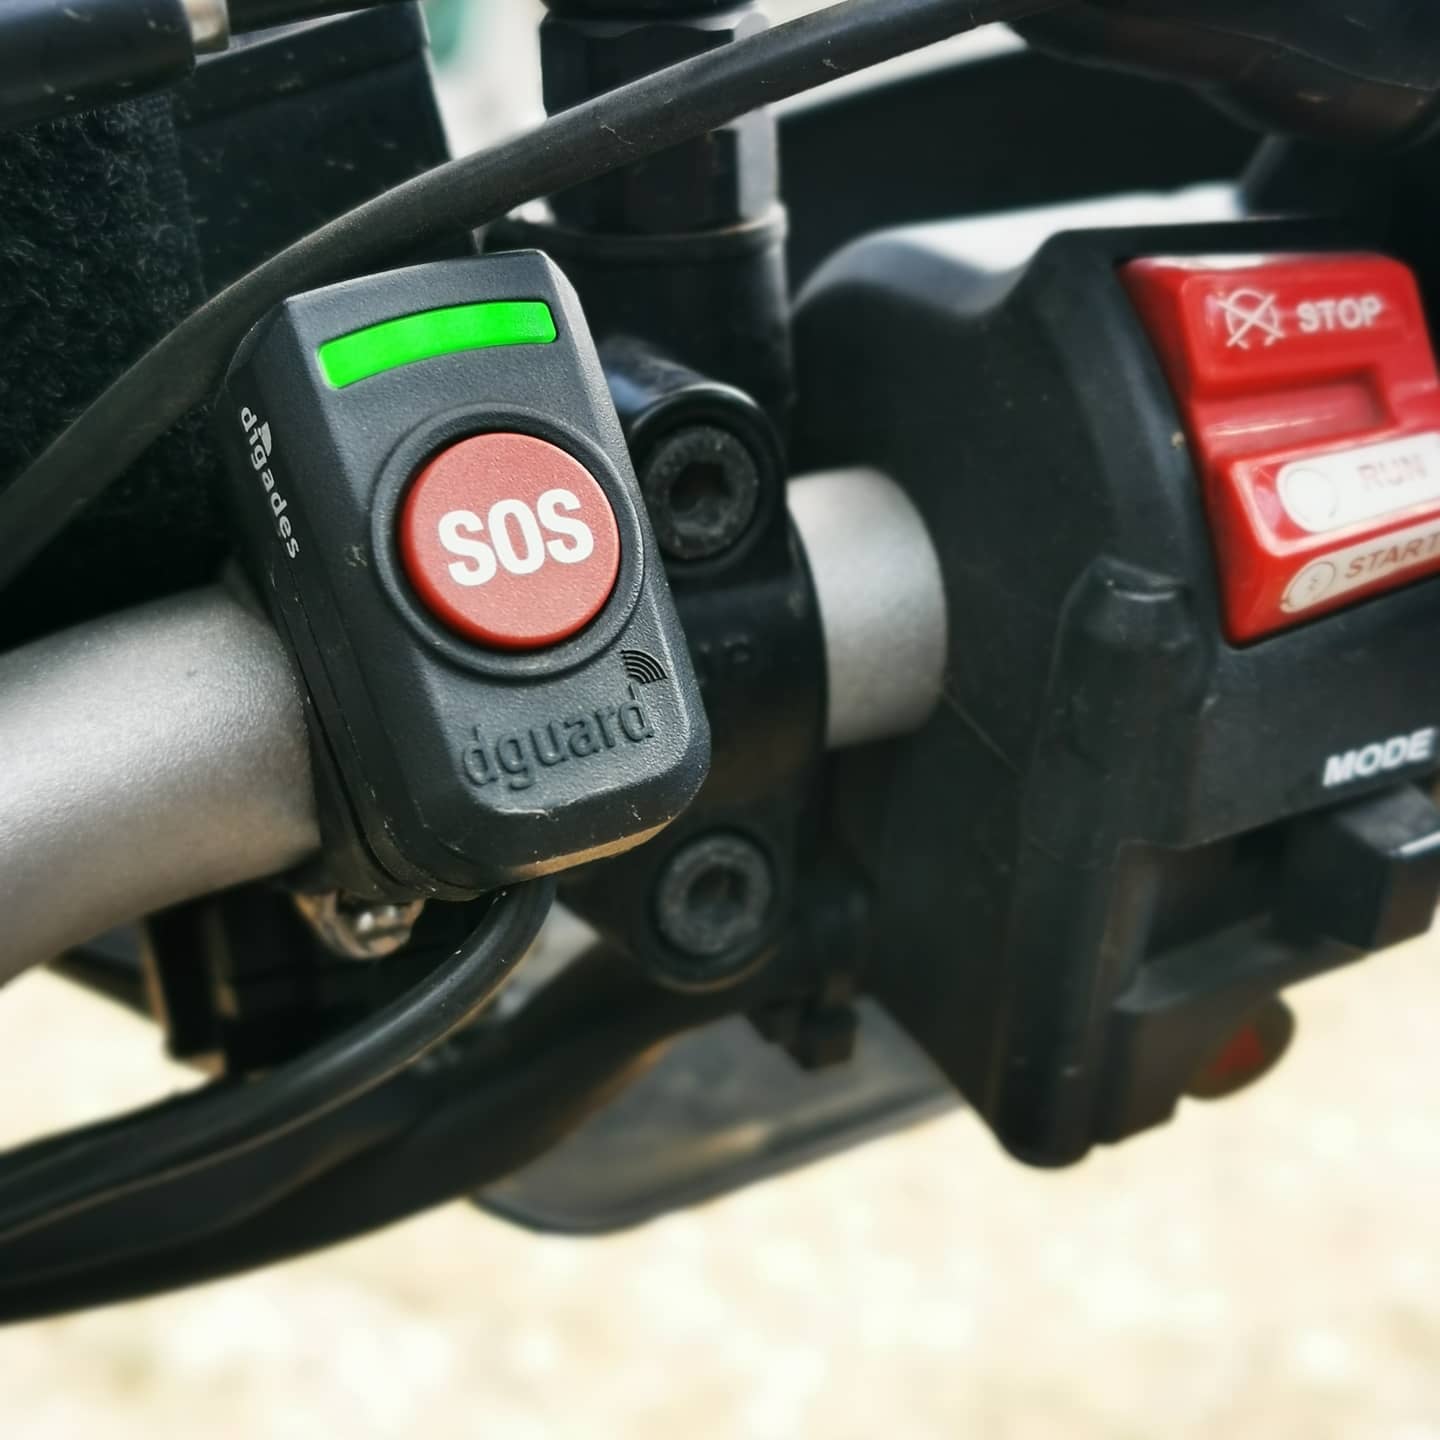 THE SOS button of the dguard emergency call system was mounted on the handlebars of this motorcycle. It is also possible to mount it at the front of the pulpit.